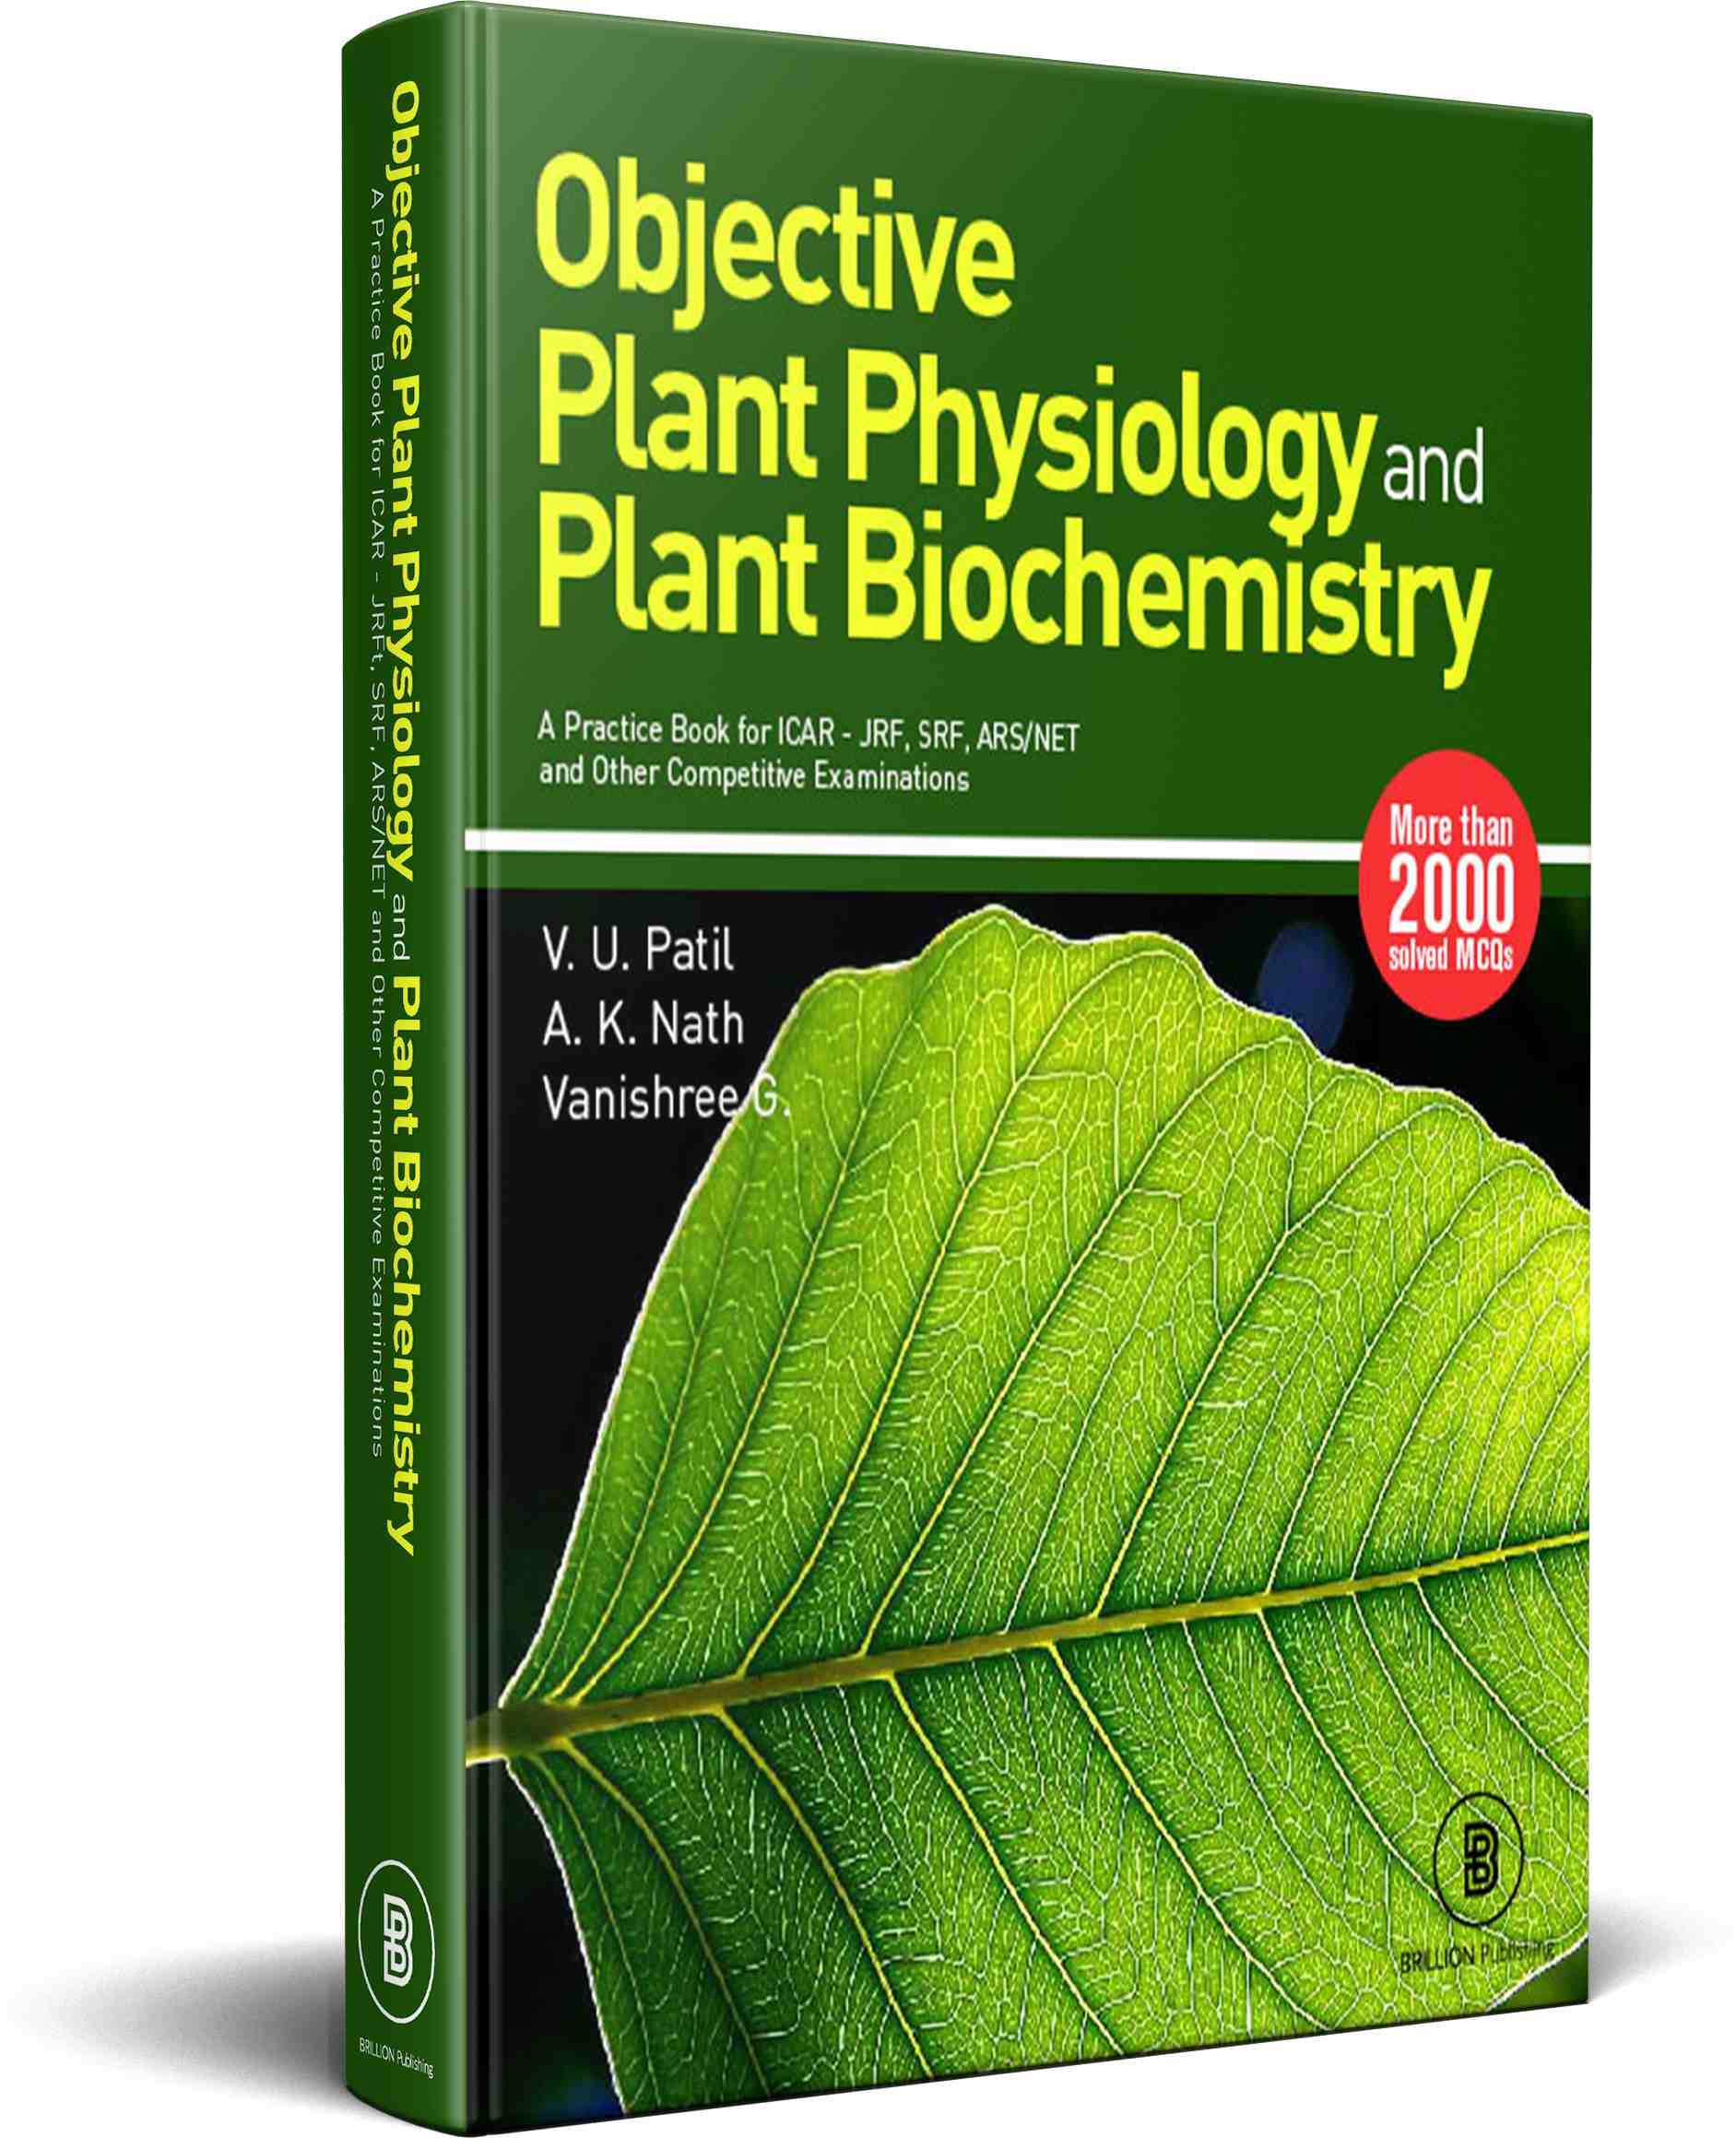 Objective Physiology and Plant Biochemistry: Practice Book for ICAR-JRF, SRF, ARS/NET and Other Examinations – Brillion Publishing